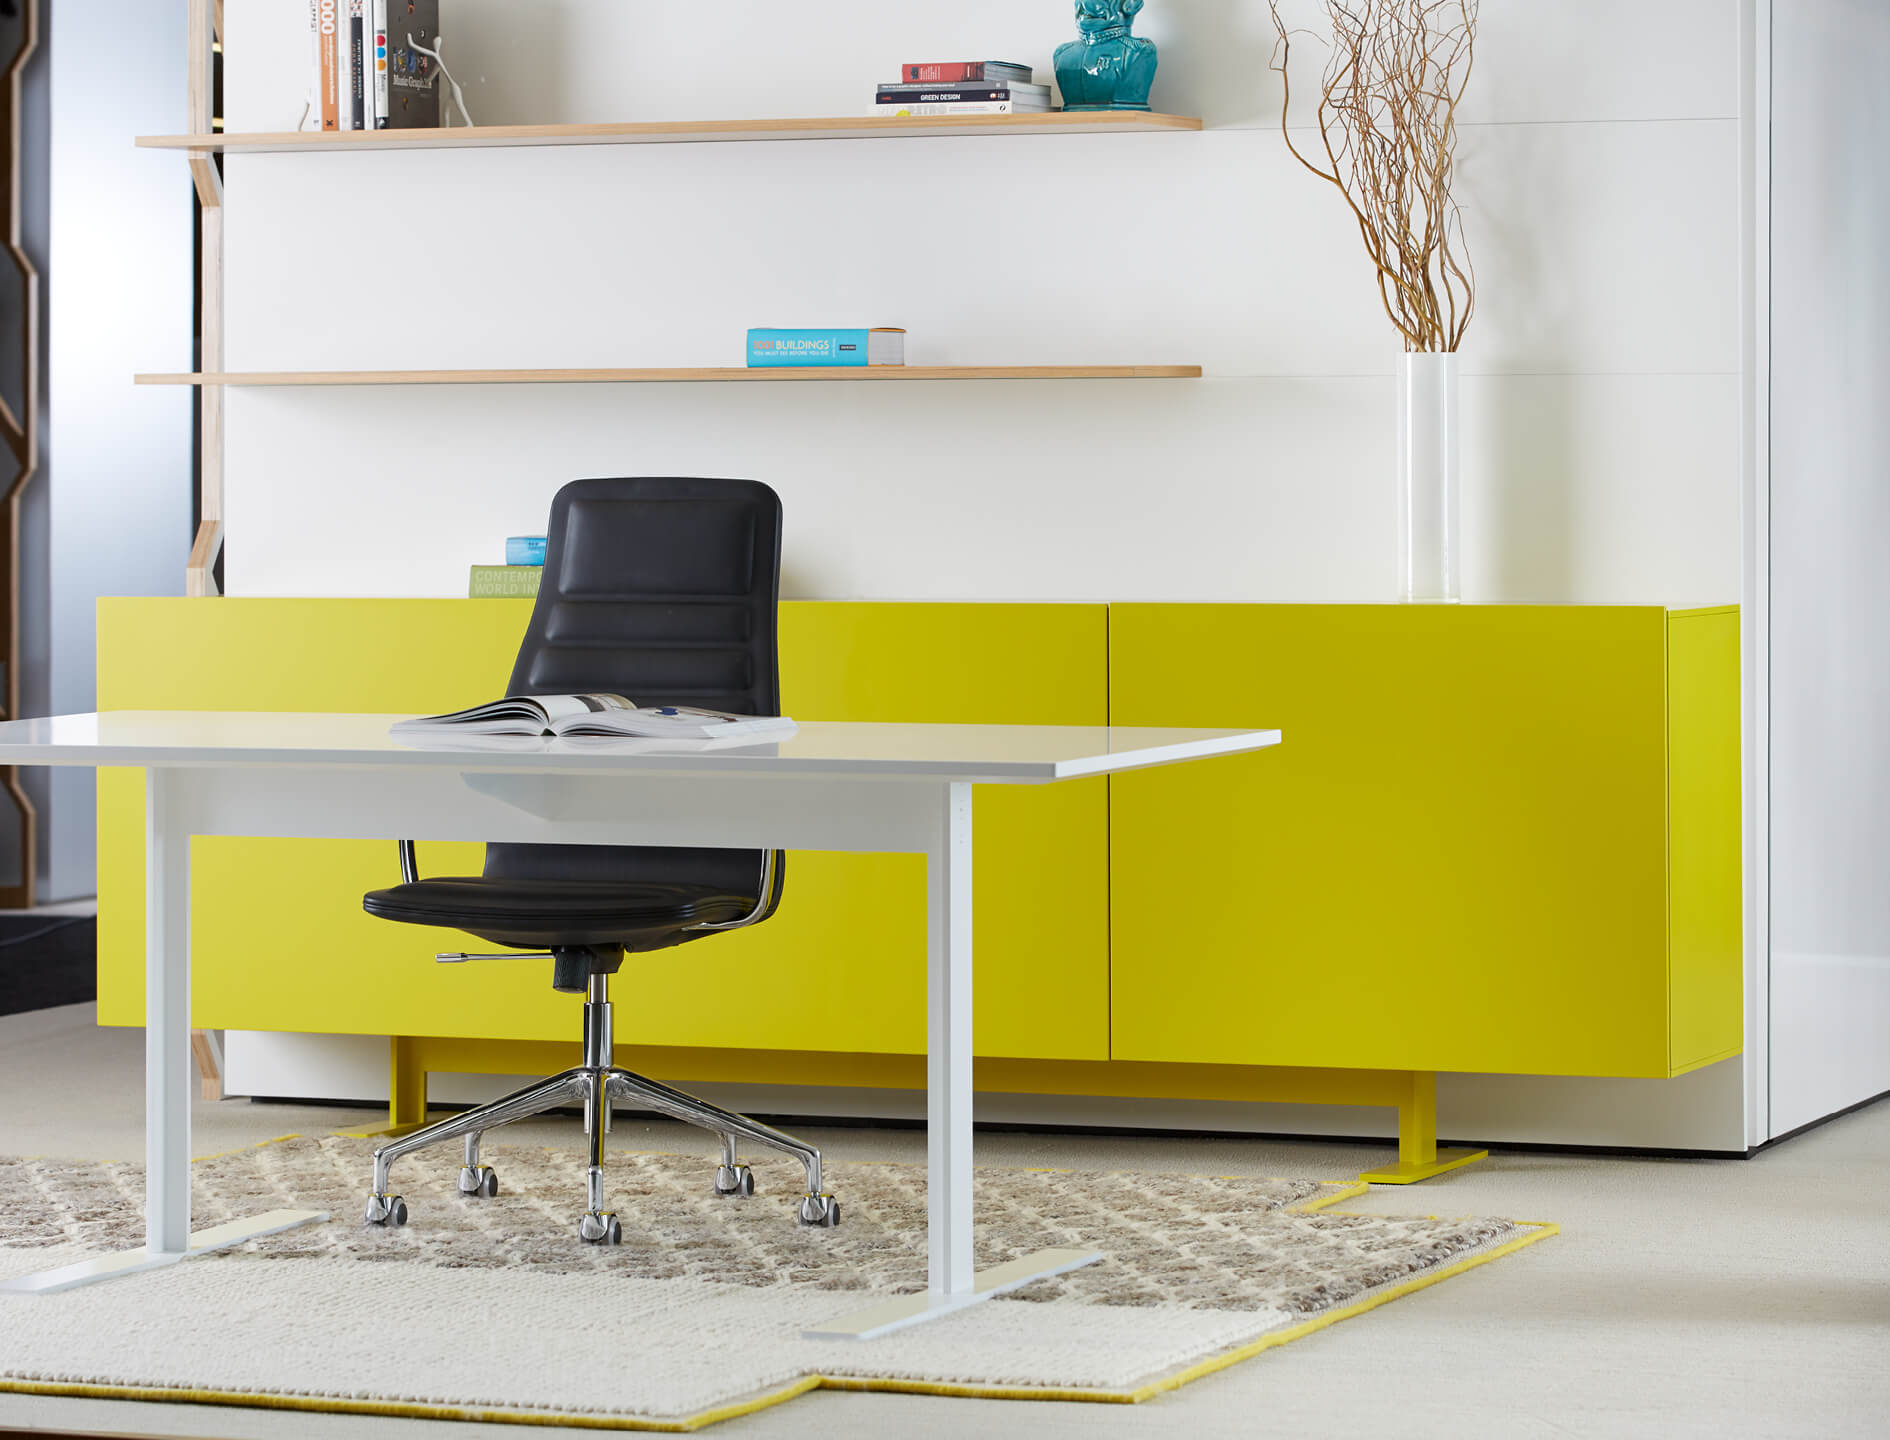 Haworth Giulio Cappellini Designers white table in private office with yellow cabinet behind the desk